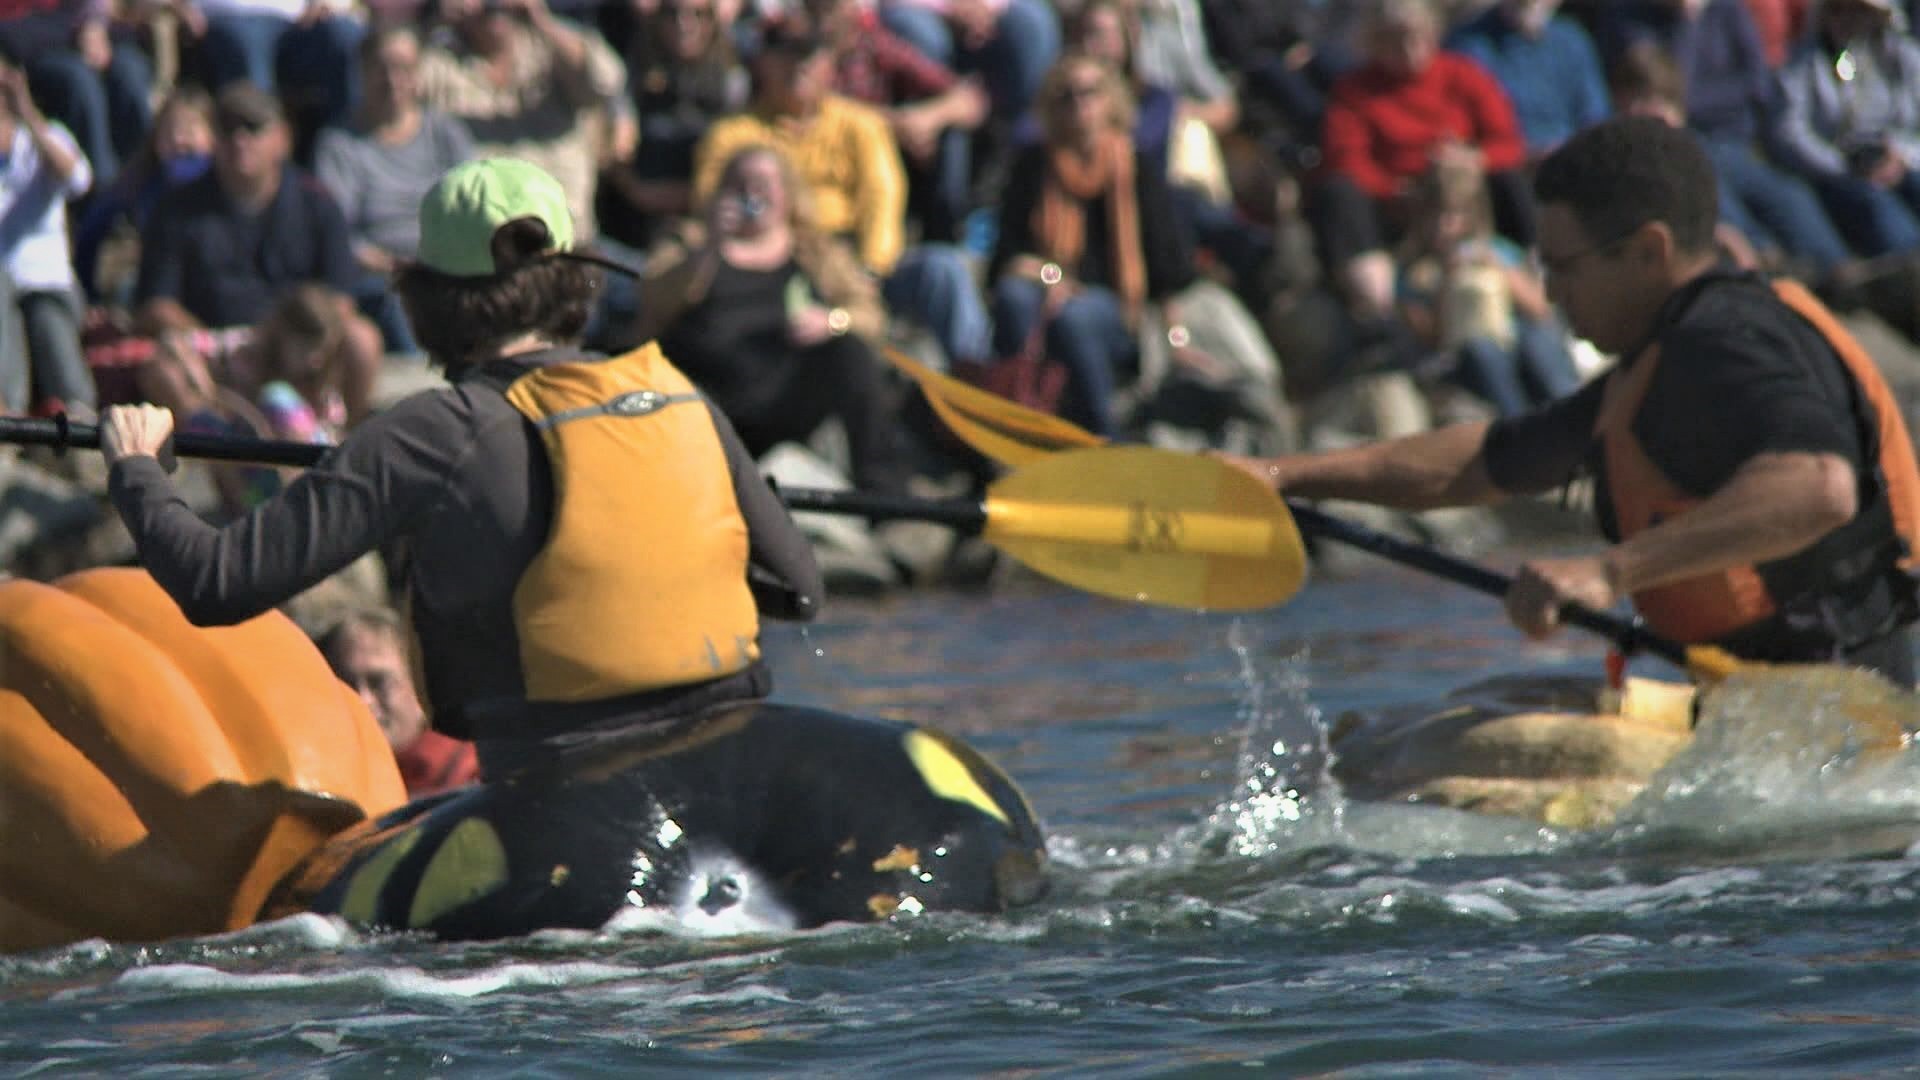 The annual tradition draws hundreds to the small town of Damariscotta to watch the pumpkins sink or swim.